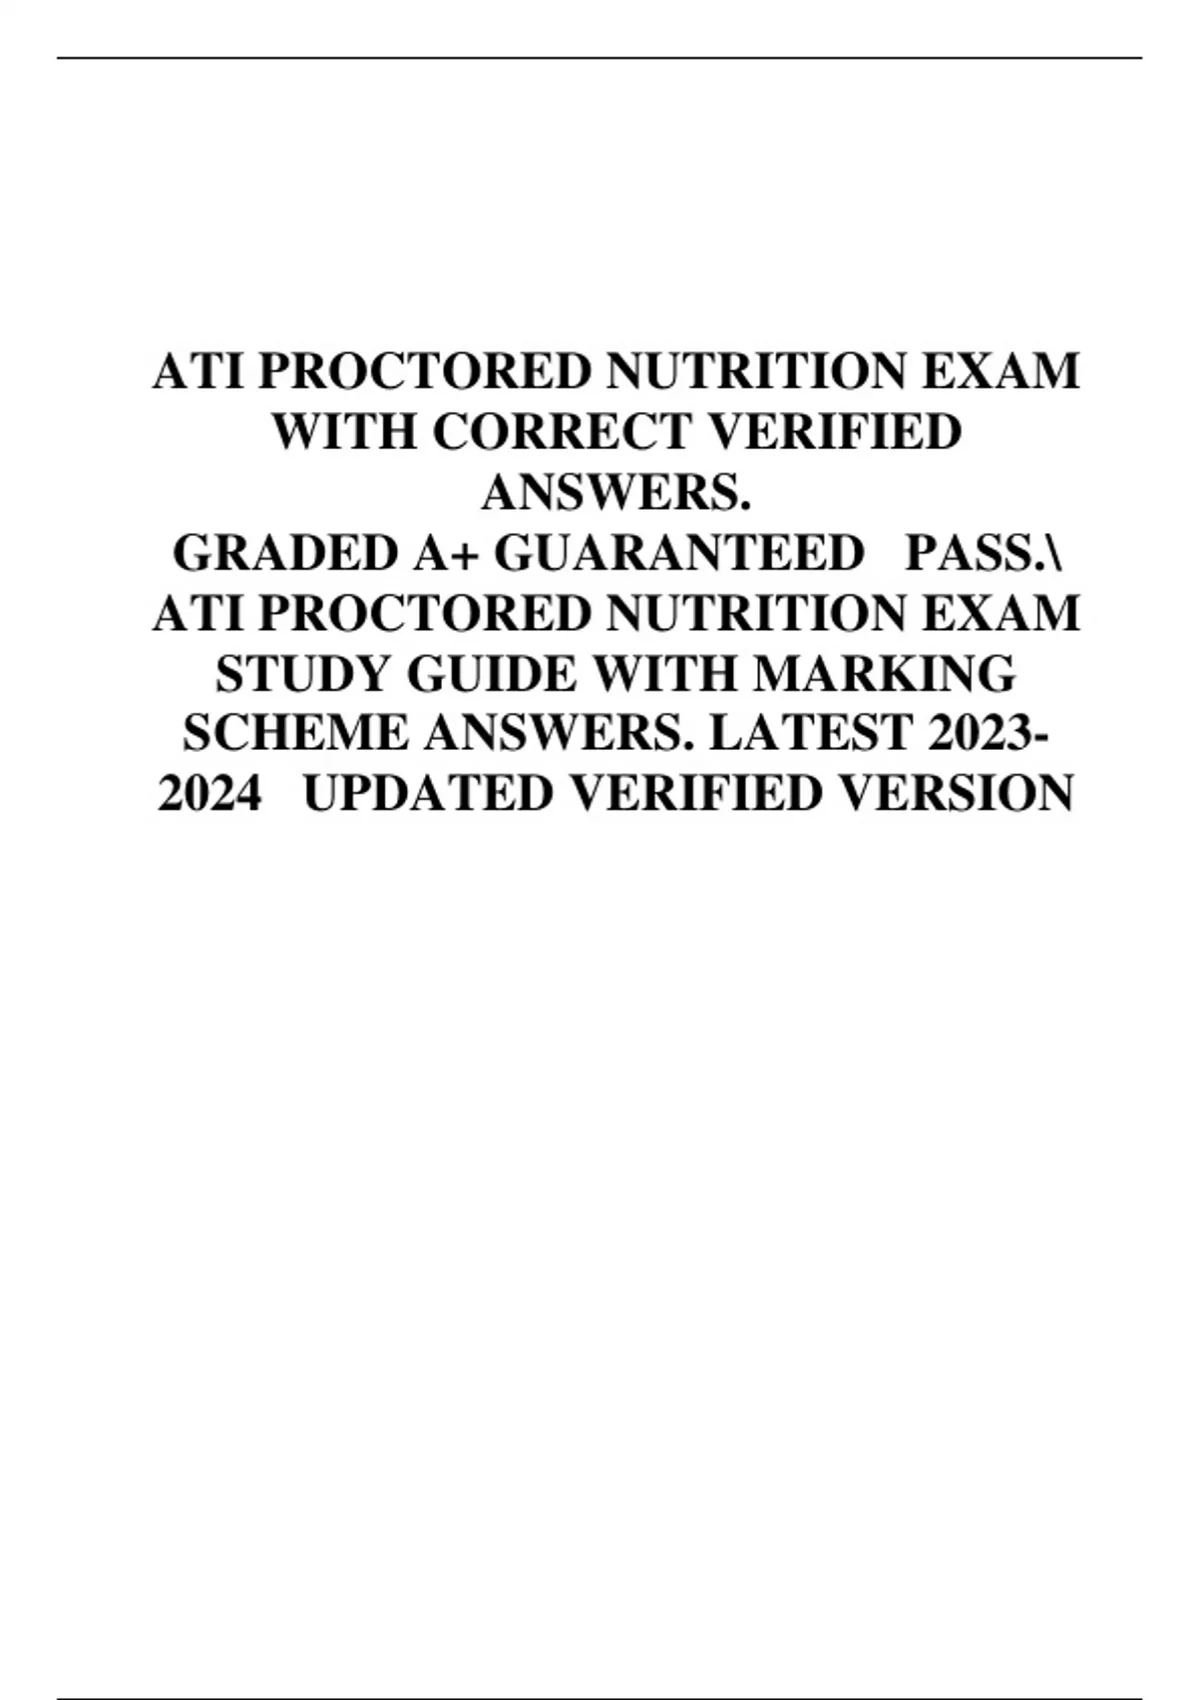 ATI PROCTORED NUTRITION EXAM WITH CORRECT VERIFIED ANSWERS. GRADED A+